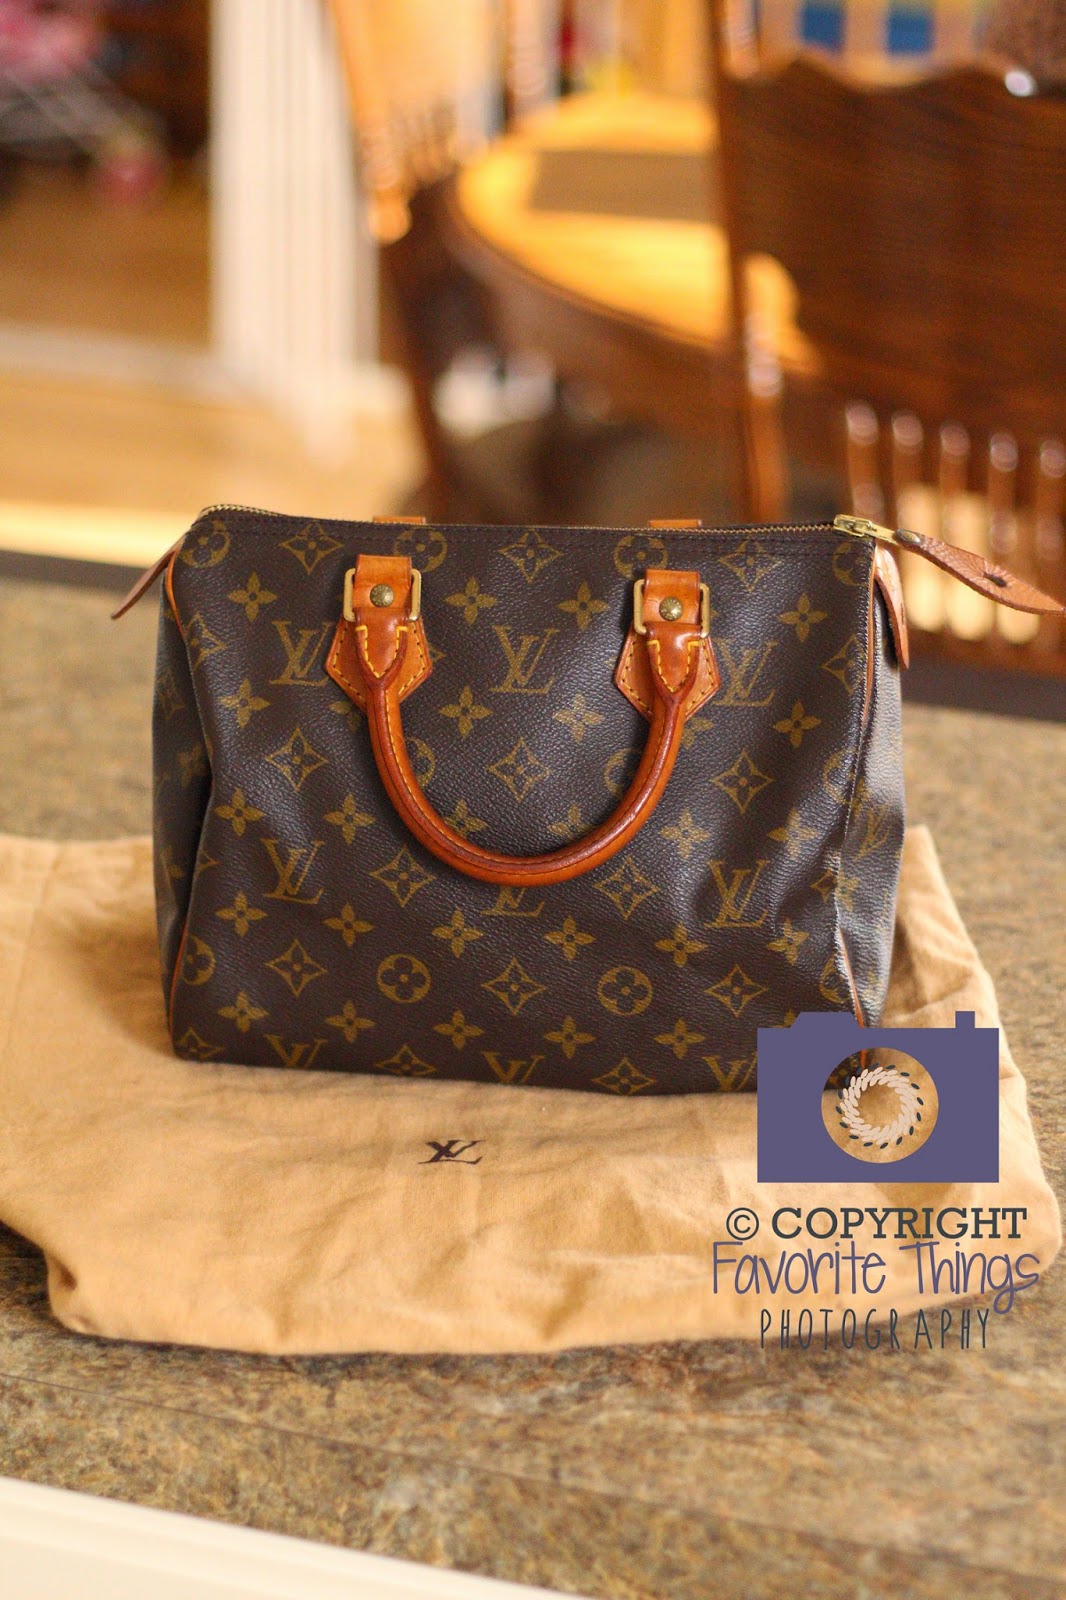 cleaning a louis vuitton bag